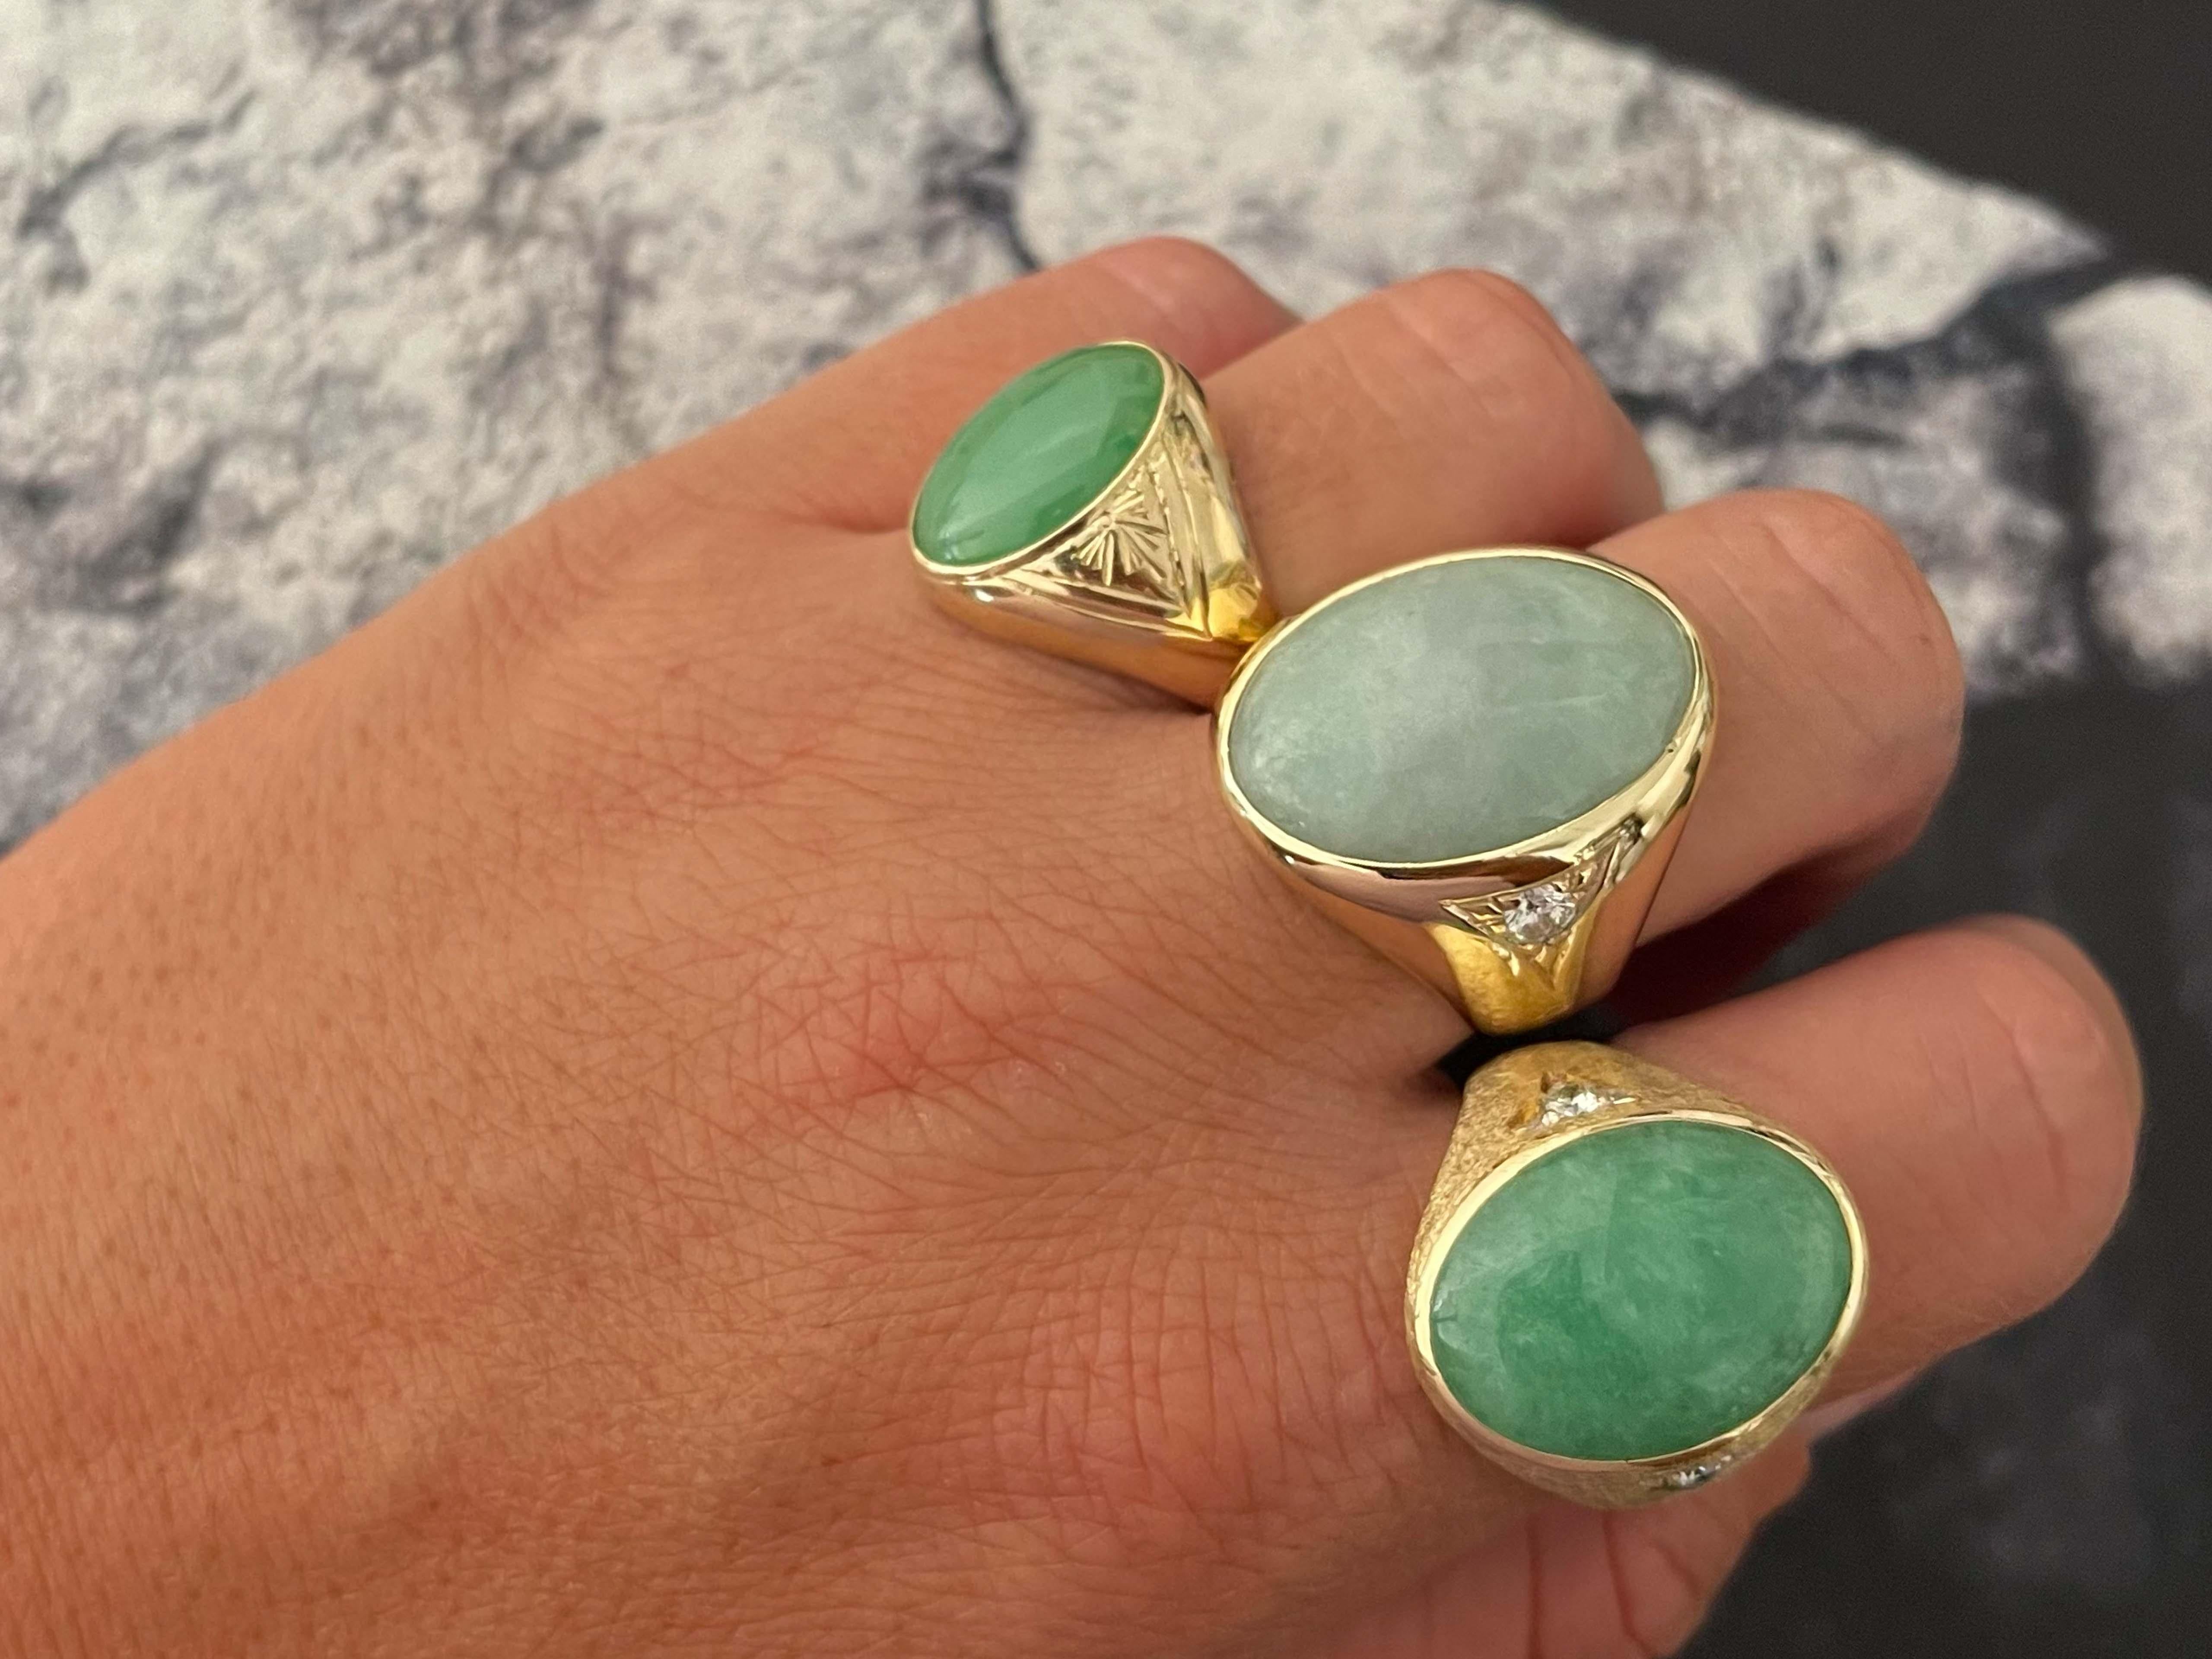 Item Specifications:

Metal: 14k Yellow Gold 

Style: Statement Ring

Ring Size: 10.5 (resizing available for a fee)

Total Weight: 6.4 Grams

Gemstone Specifications:

Center Gemstone: Jadeite Jade

Shape: Oval

Color: Green

Cut: Cabochon

Jade